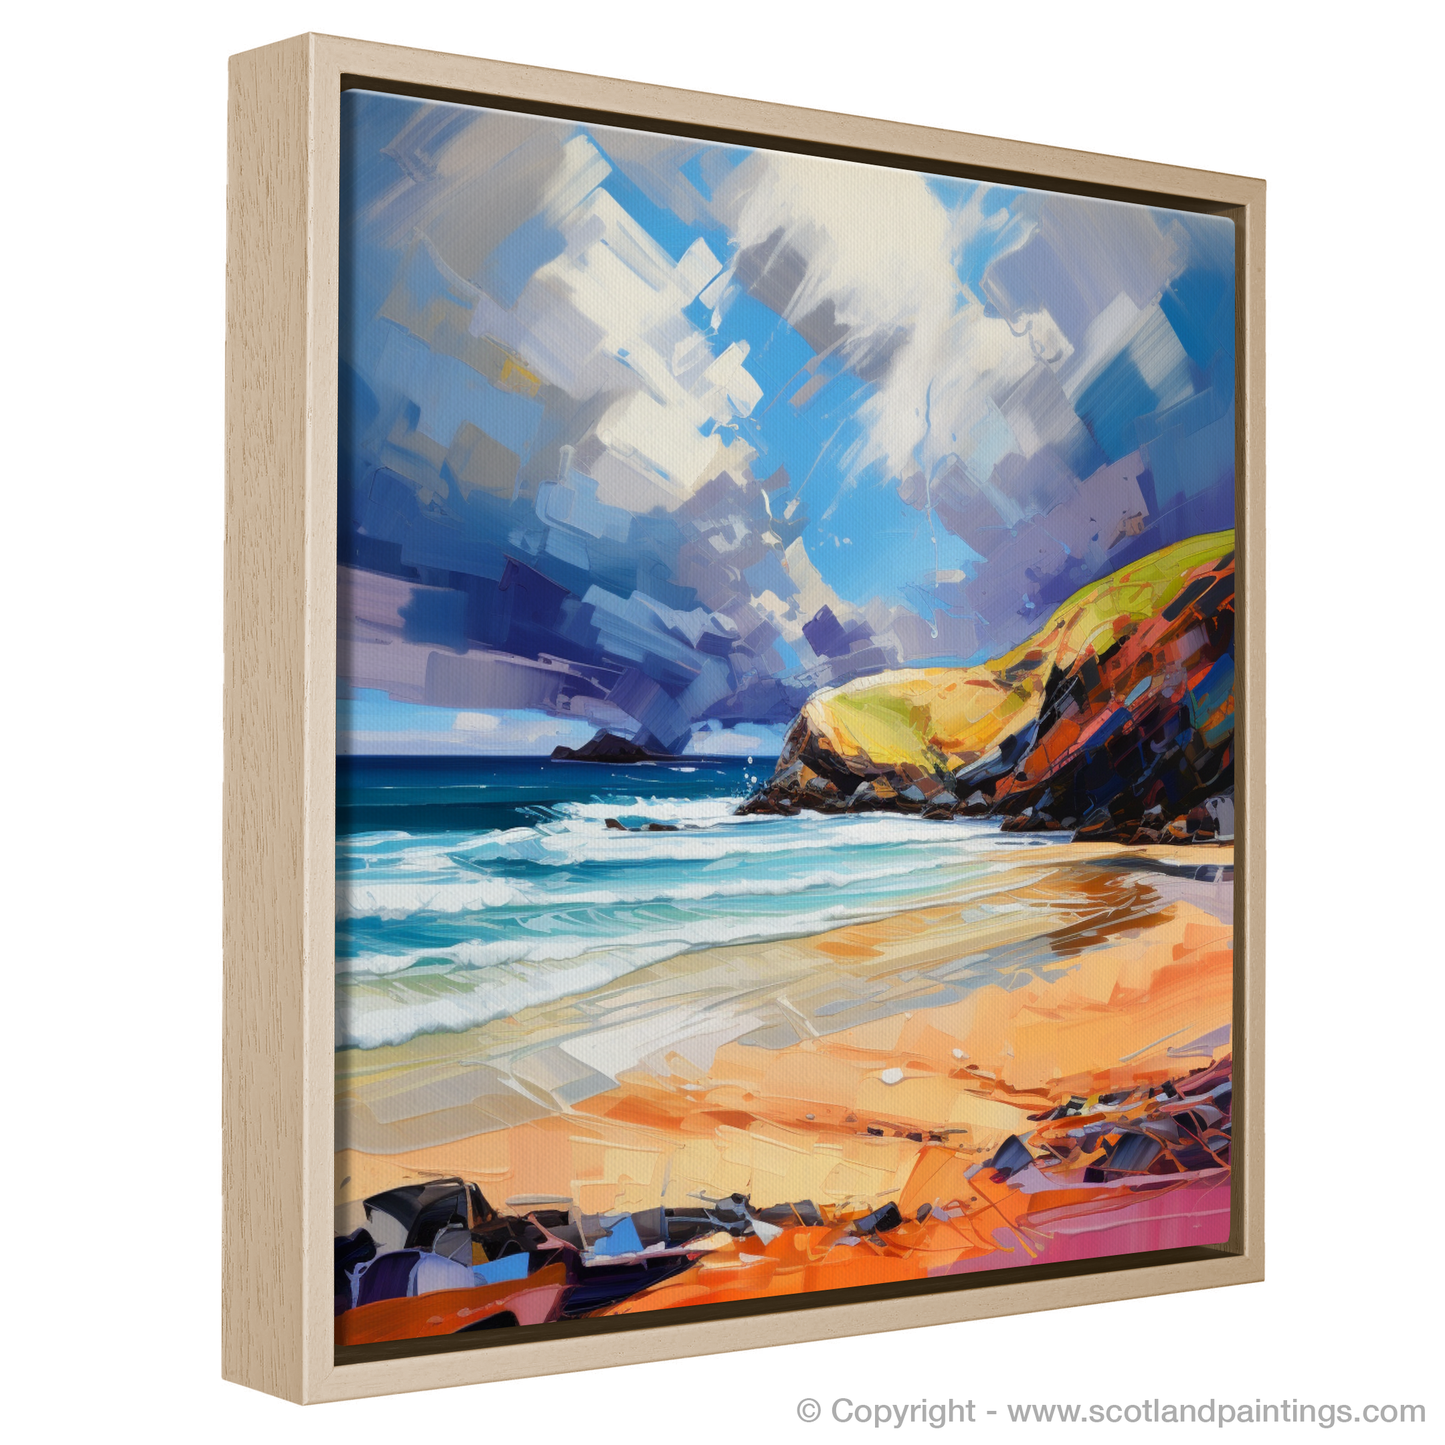 Painting and Art Print of Sandwood Bay with a stormy sky entitled "Storm's Arrival at Sandwood Bay".